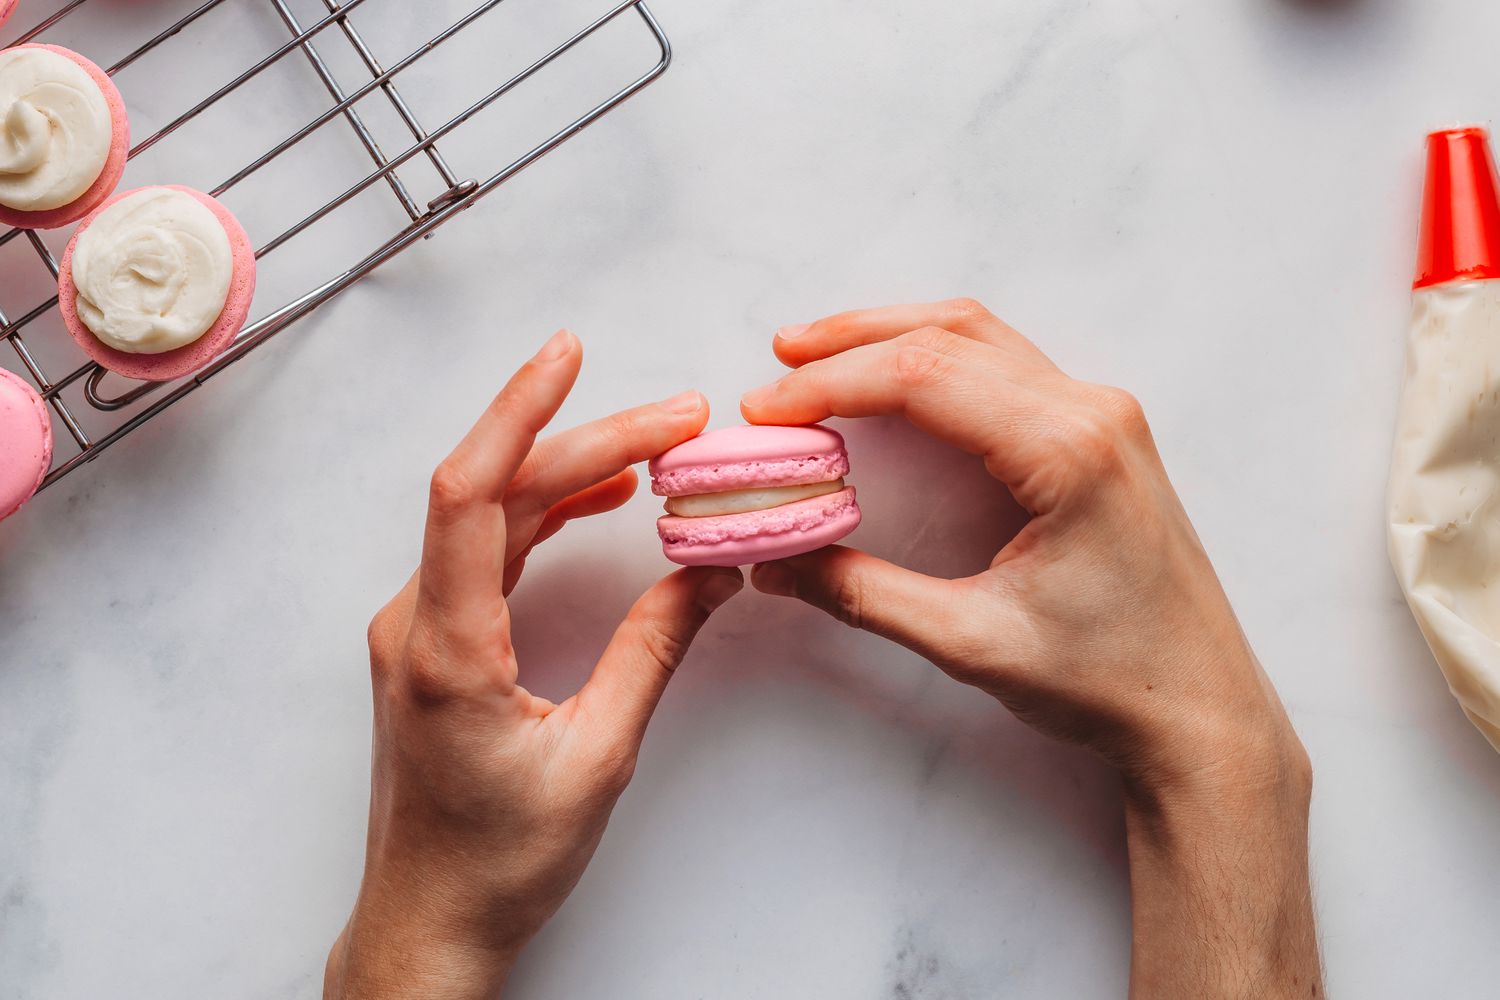 A pink macaron being held by a pair of hands